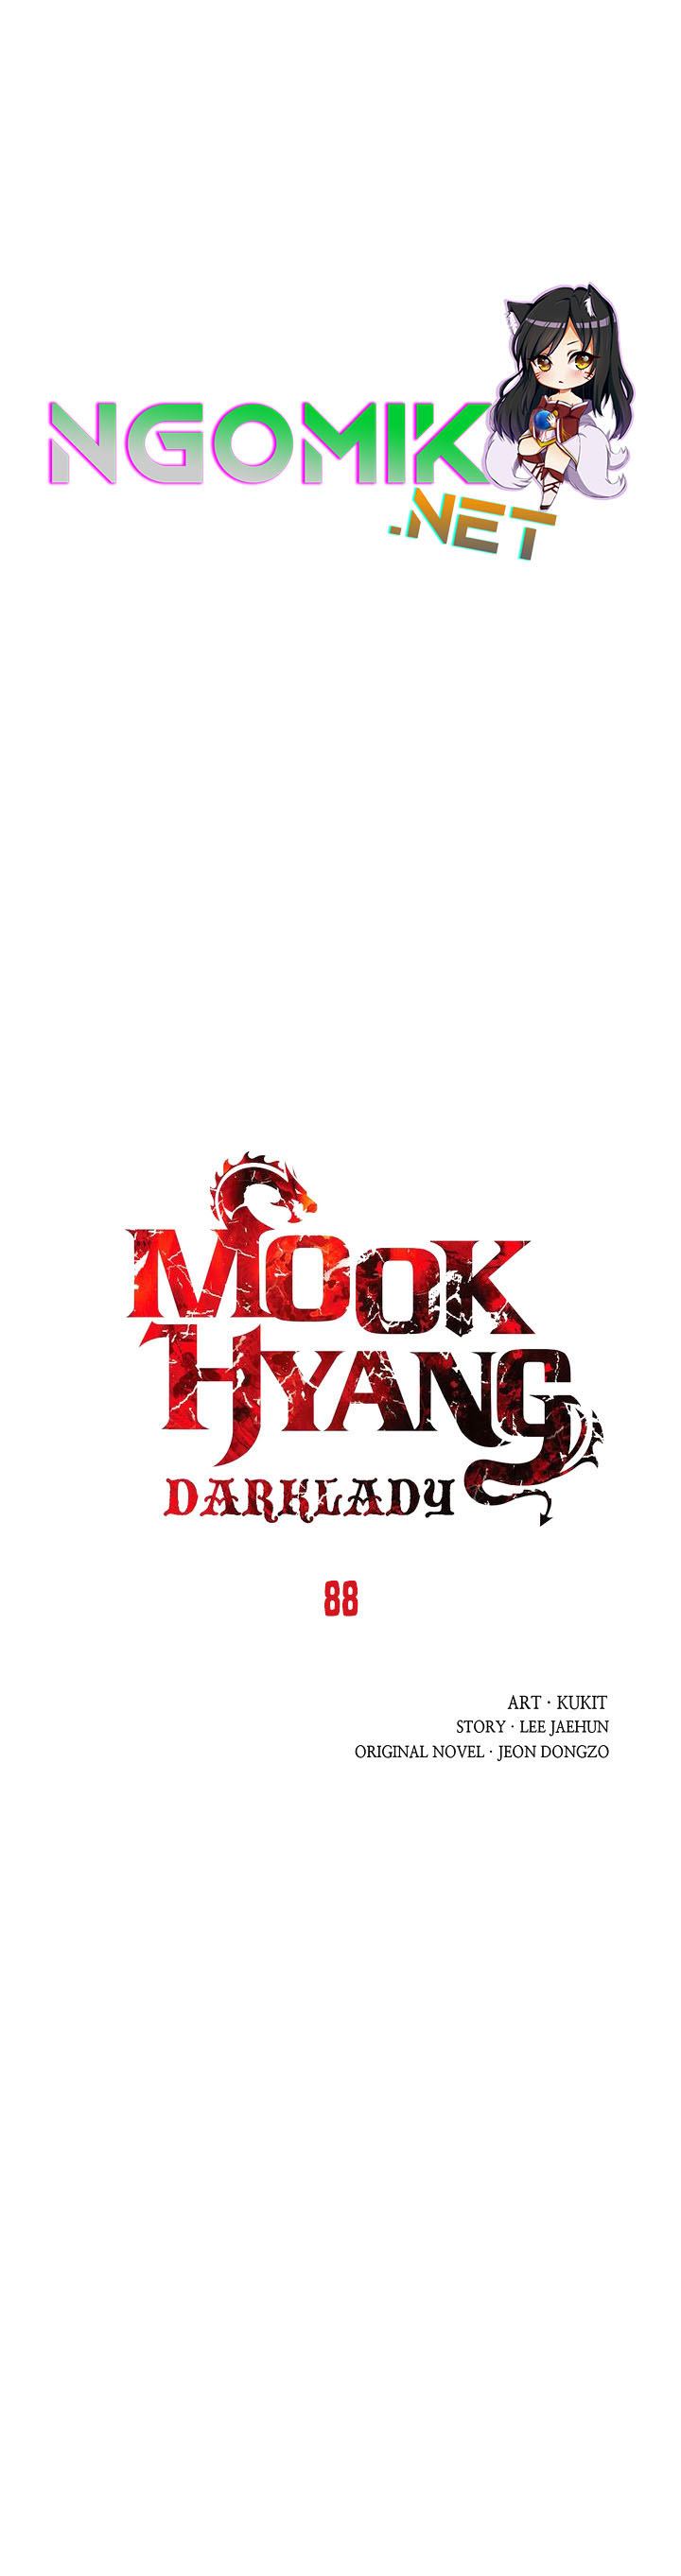 Mookhyang Dark Lady Chapter 88